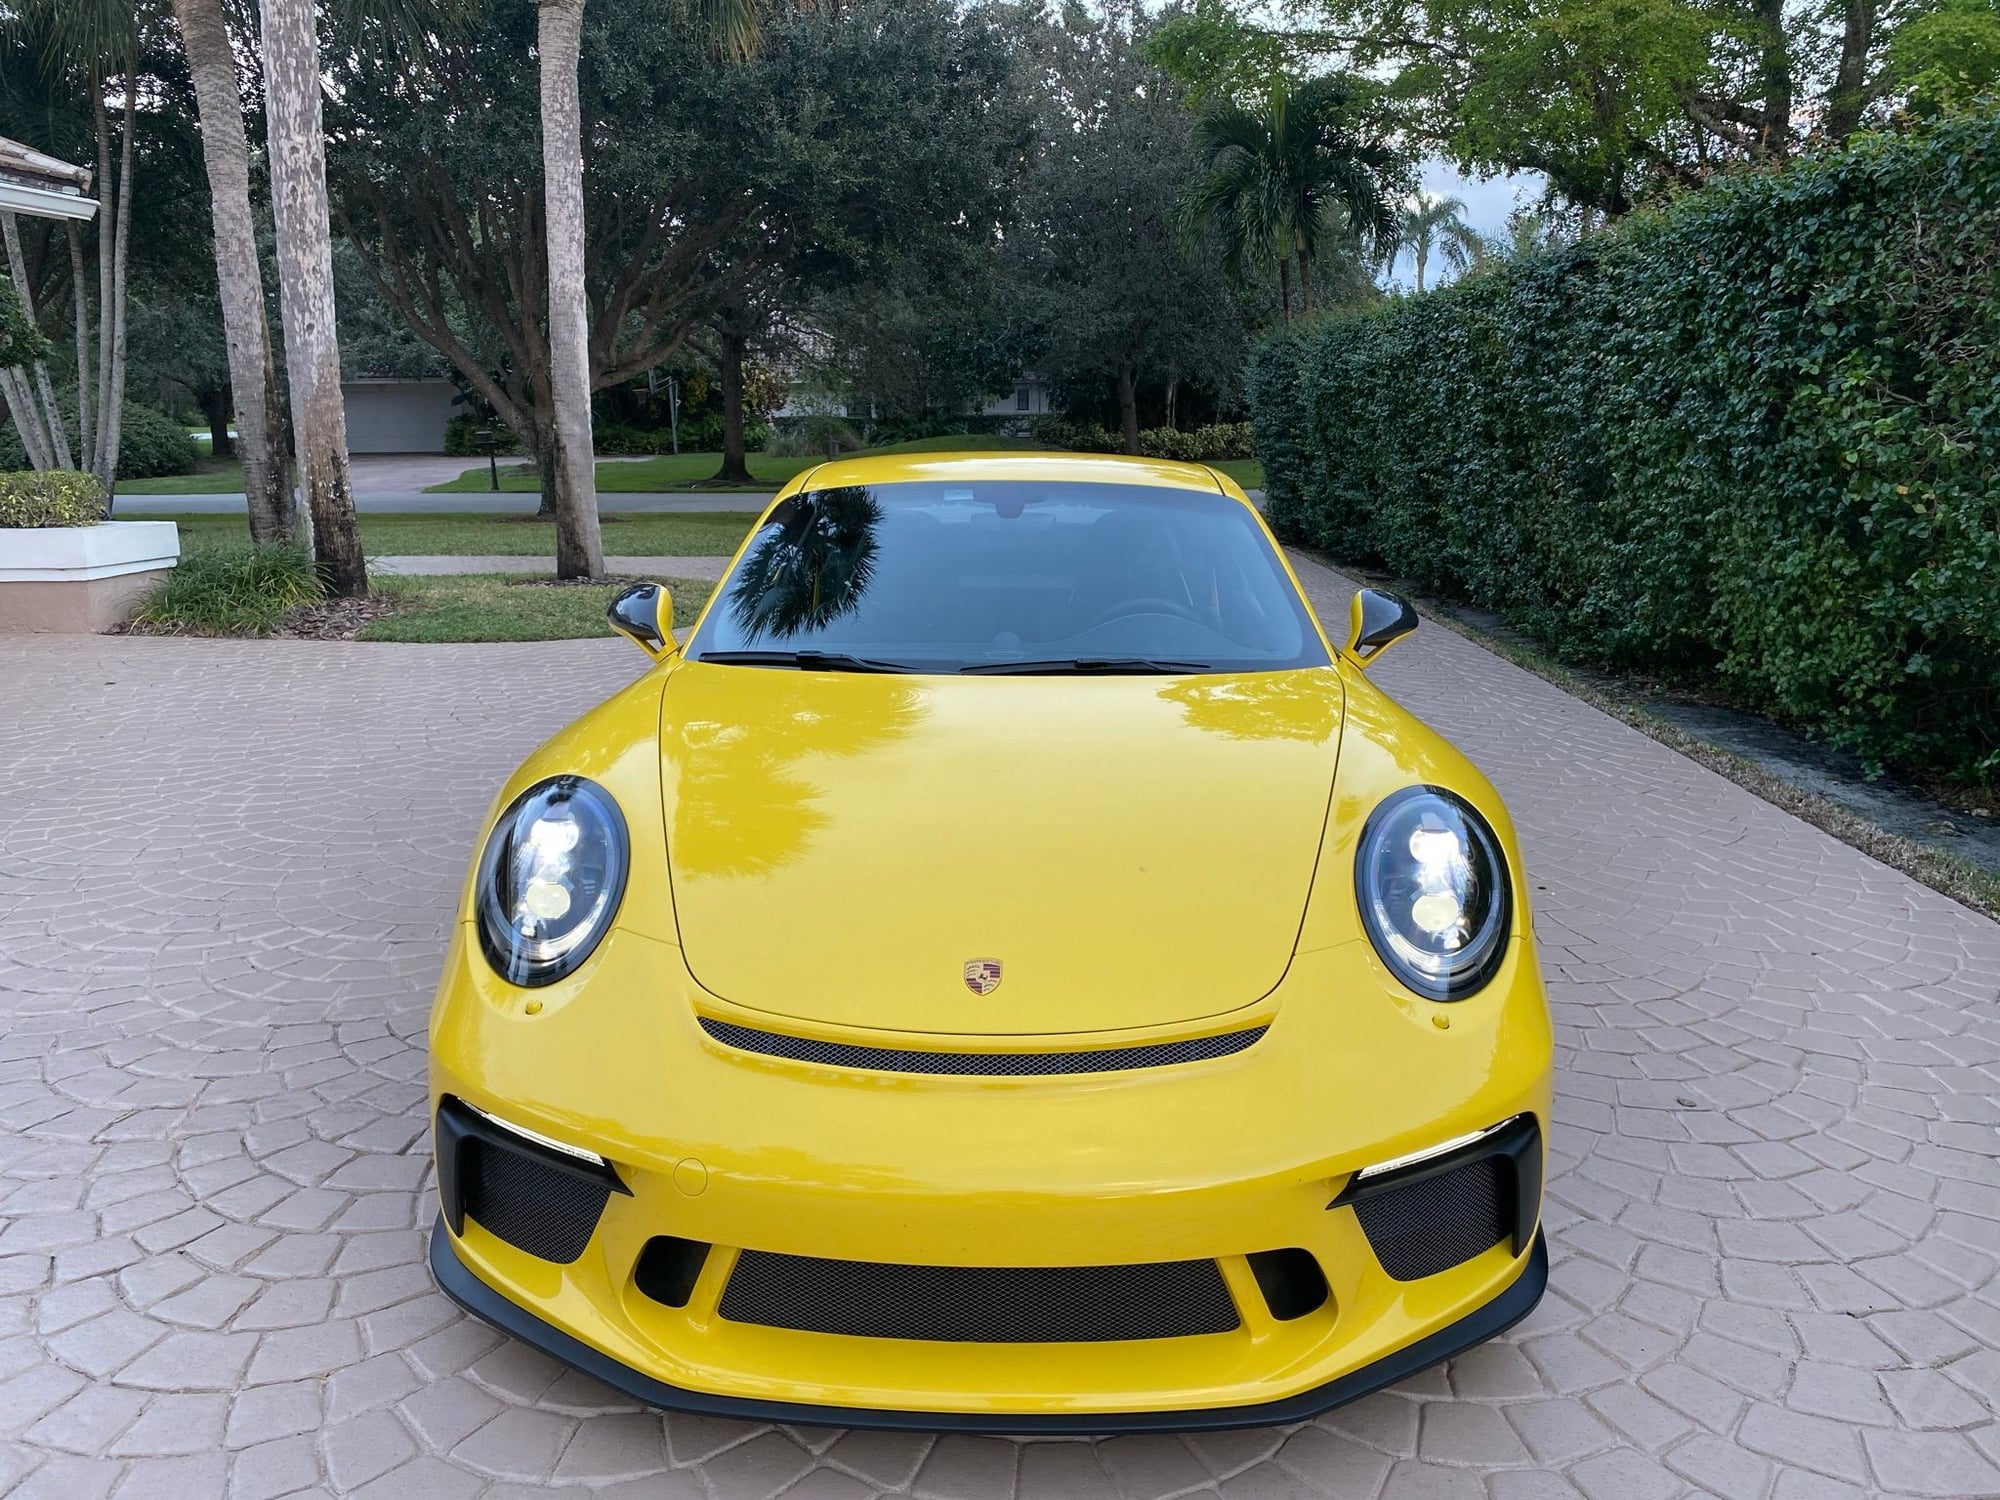 2019 Porsche GT3 - 2019 GT3 Touring $186k MSRP racing yellow 2,900 miles Warranty until March 2025 - Used - VIN WP0AC2A93KS149384 - 2WD - Manual - Coupe - Yellow - Parkland, FL 33067, United States